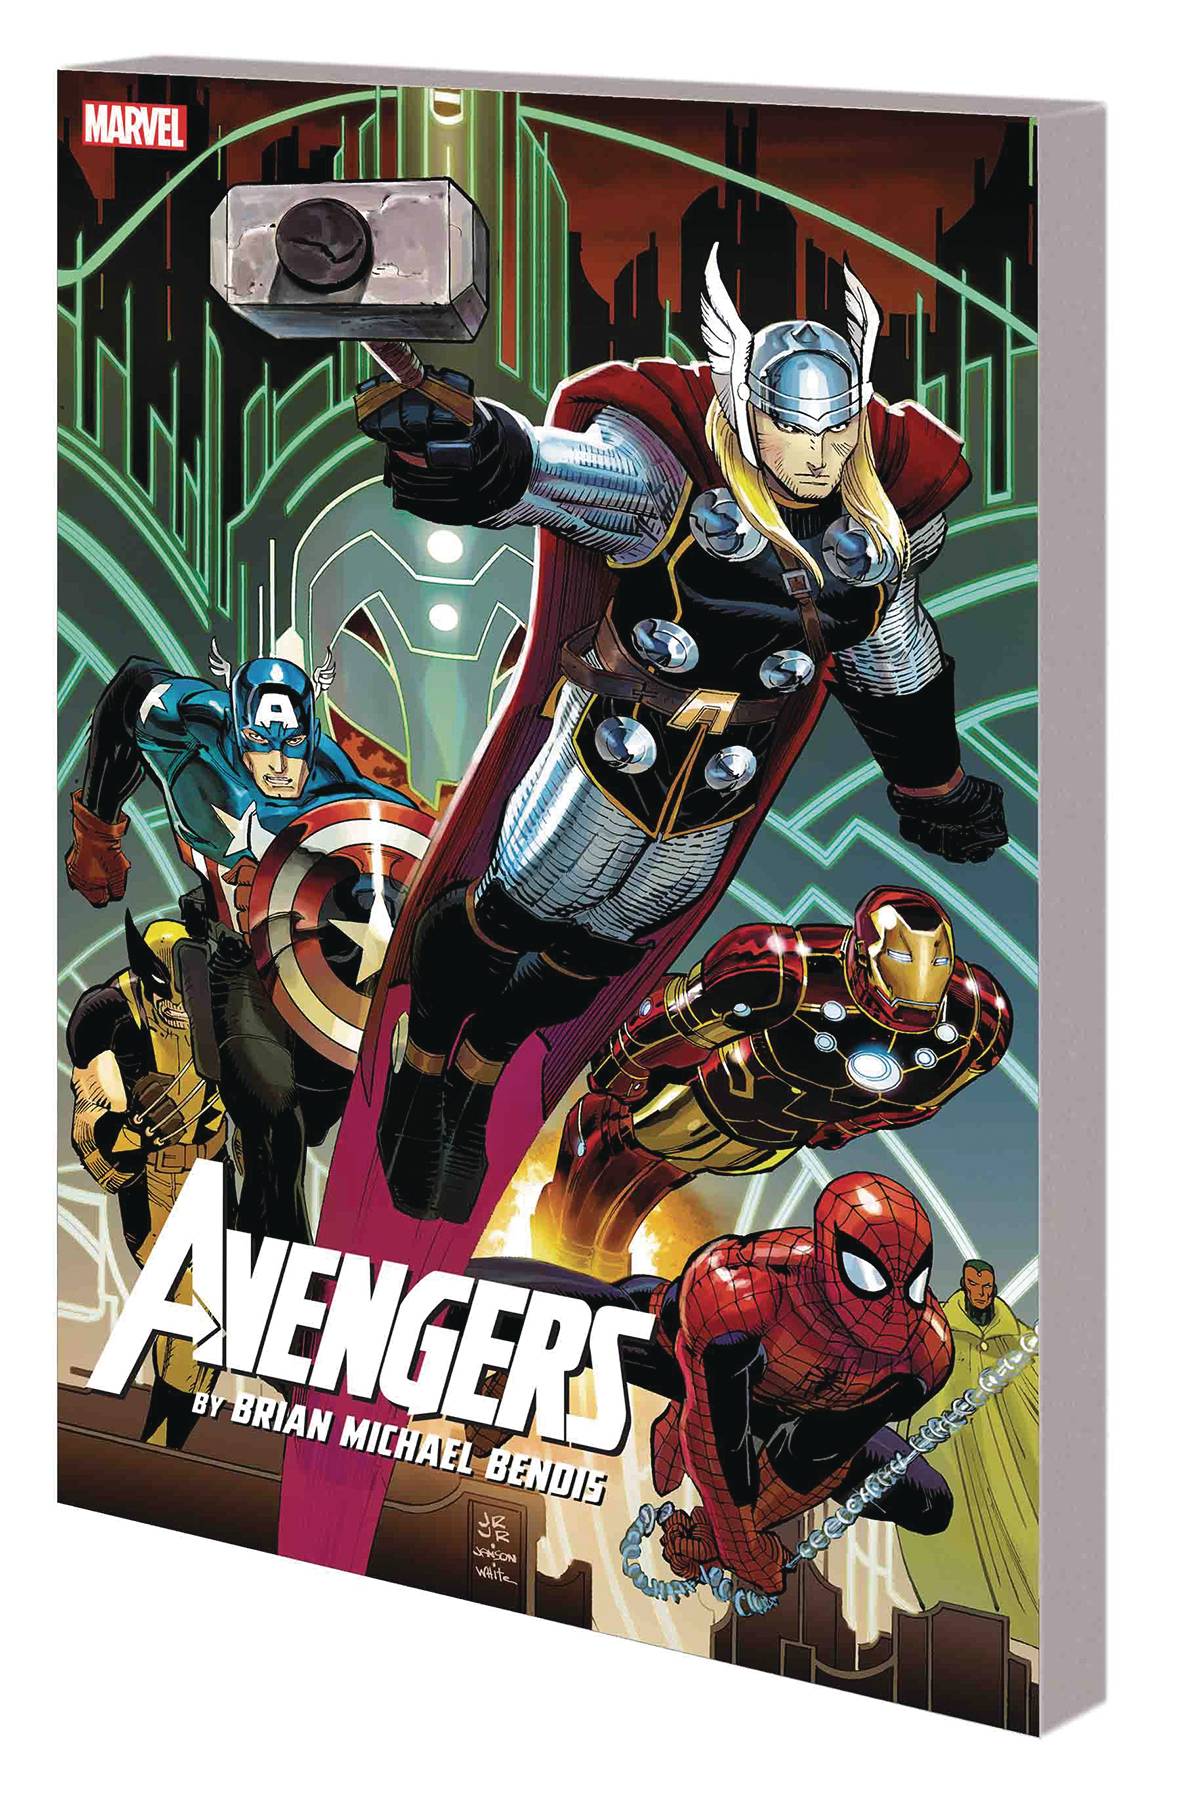 AVENGERS BY BENDIS COMPLETE COLLECTION TP VOL 01